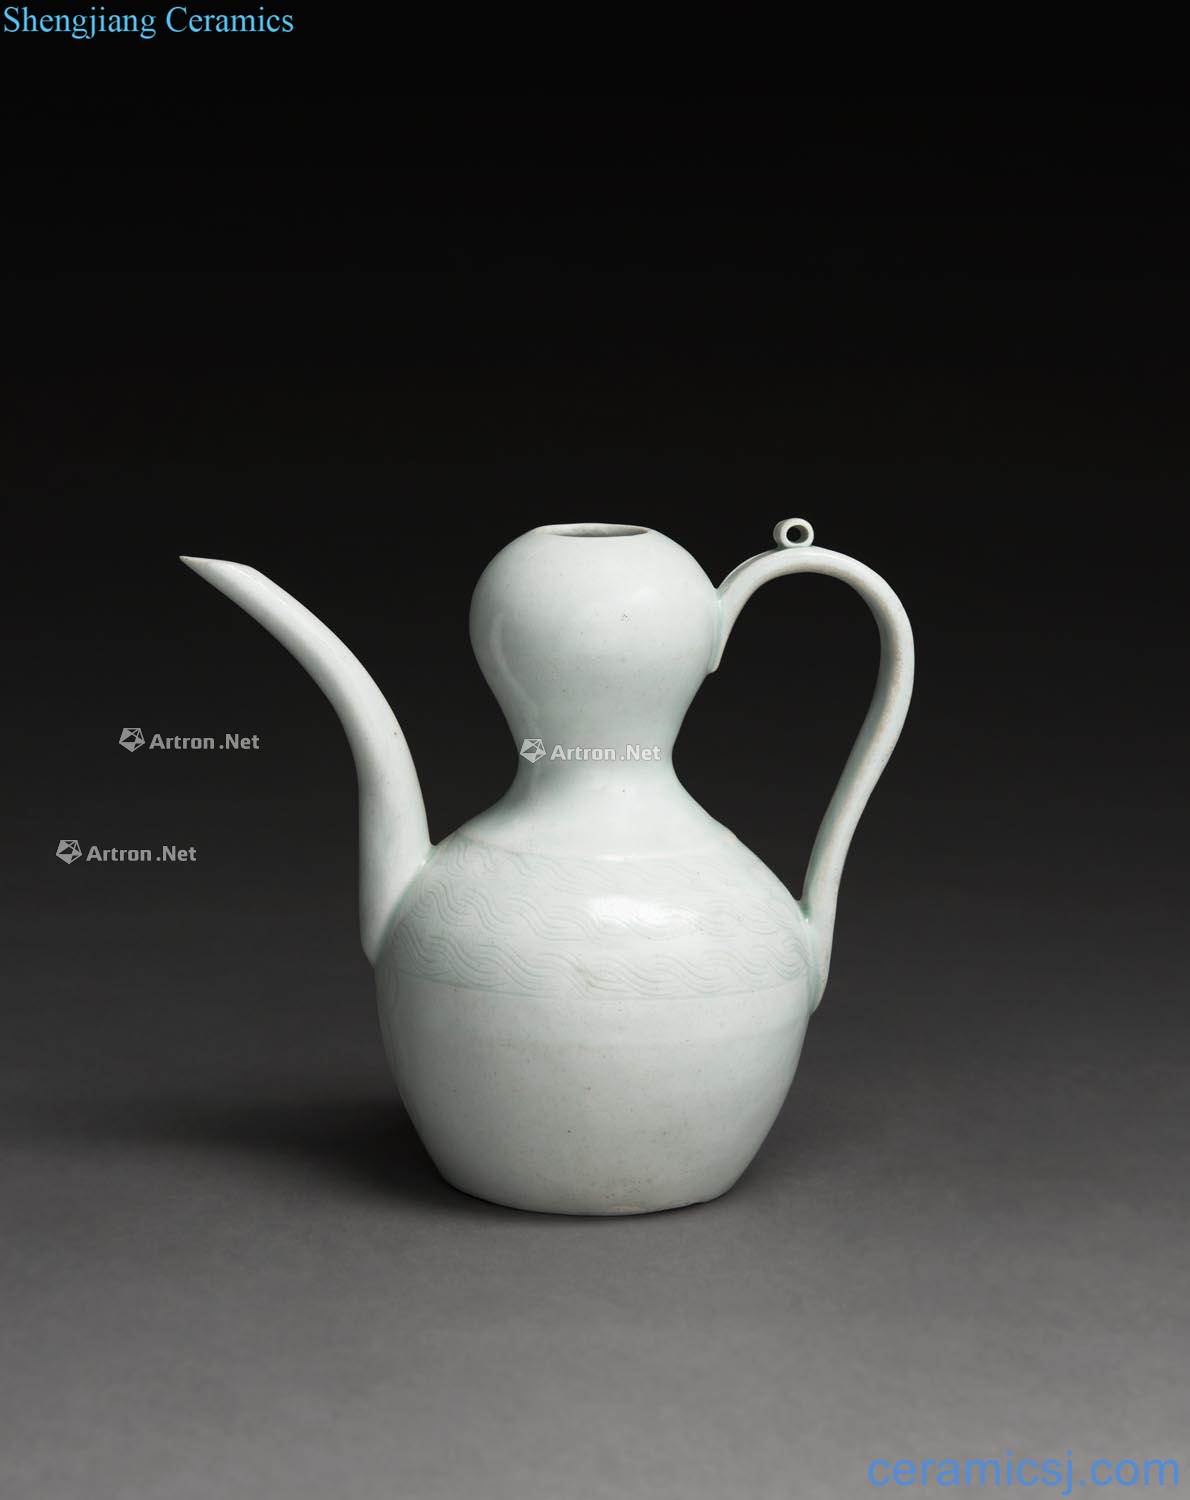 The song dynasty in the 12th century, stimulation gourd type pot